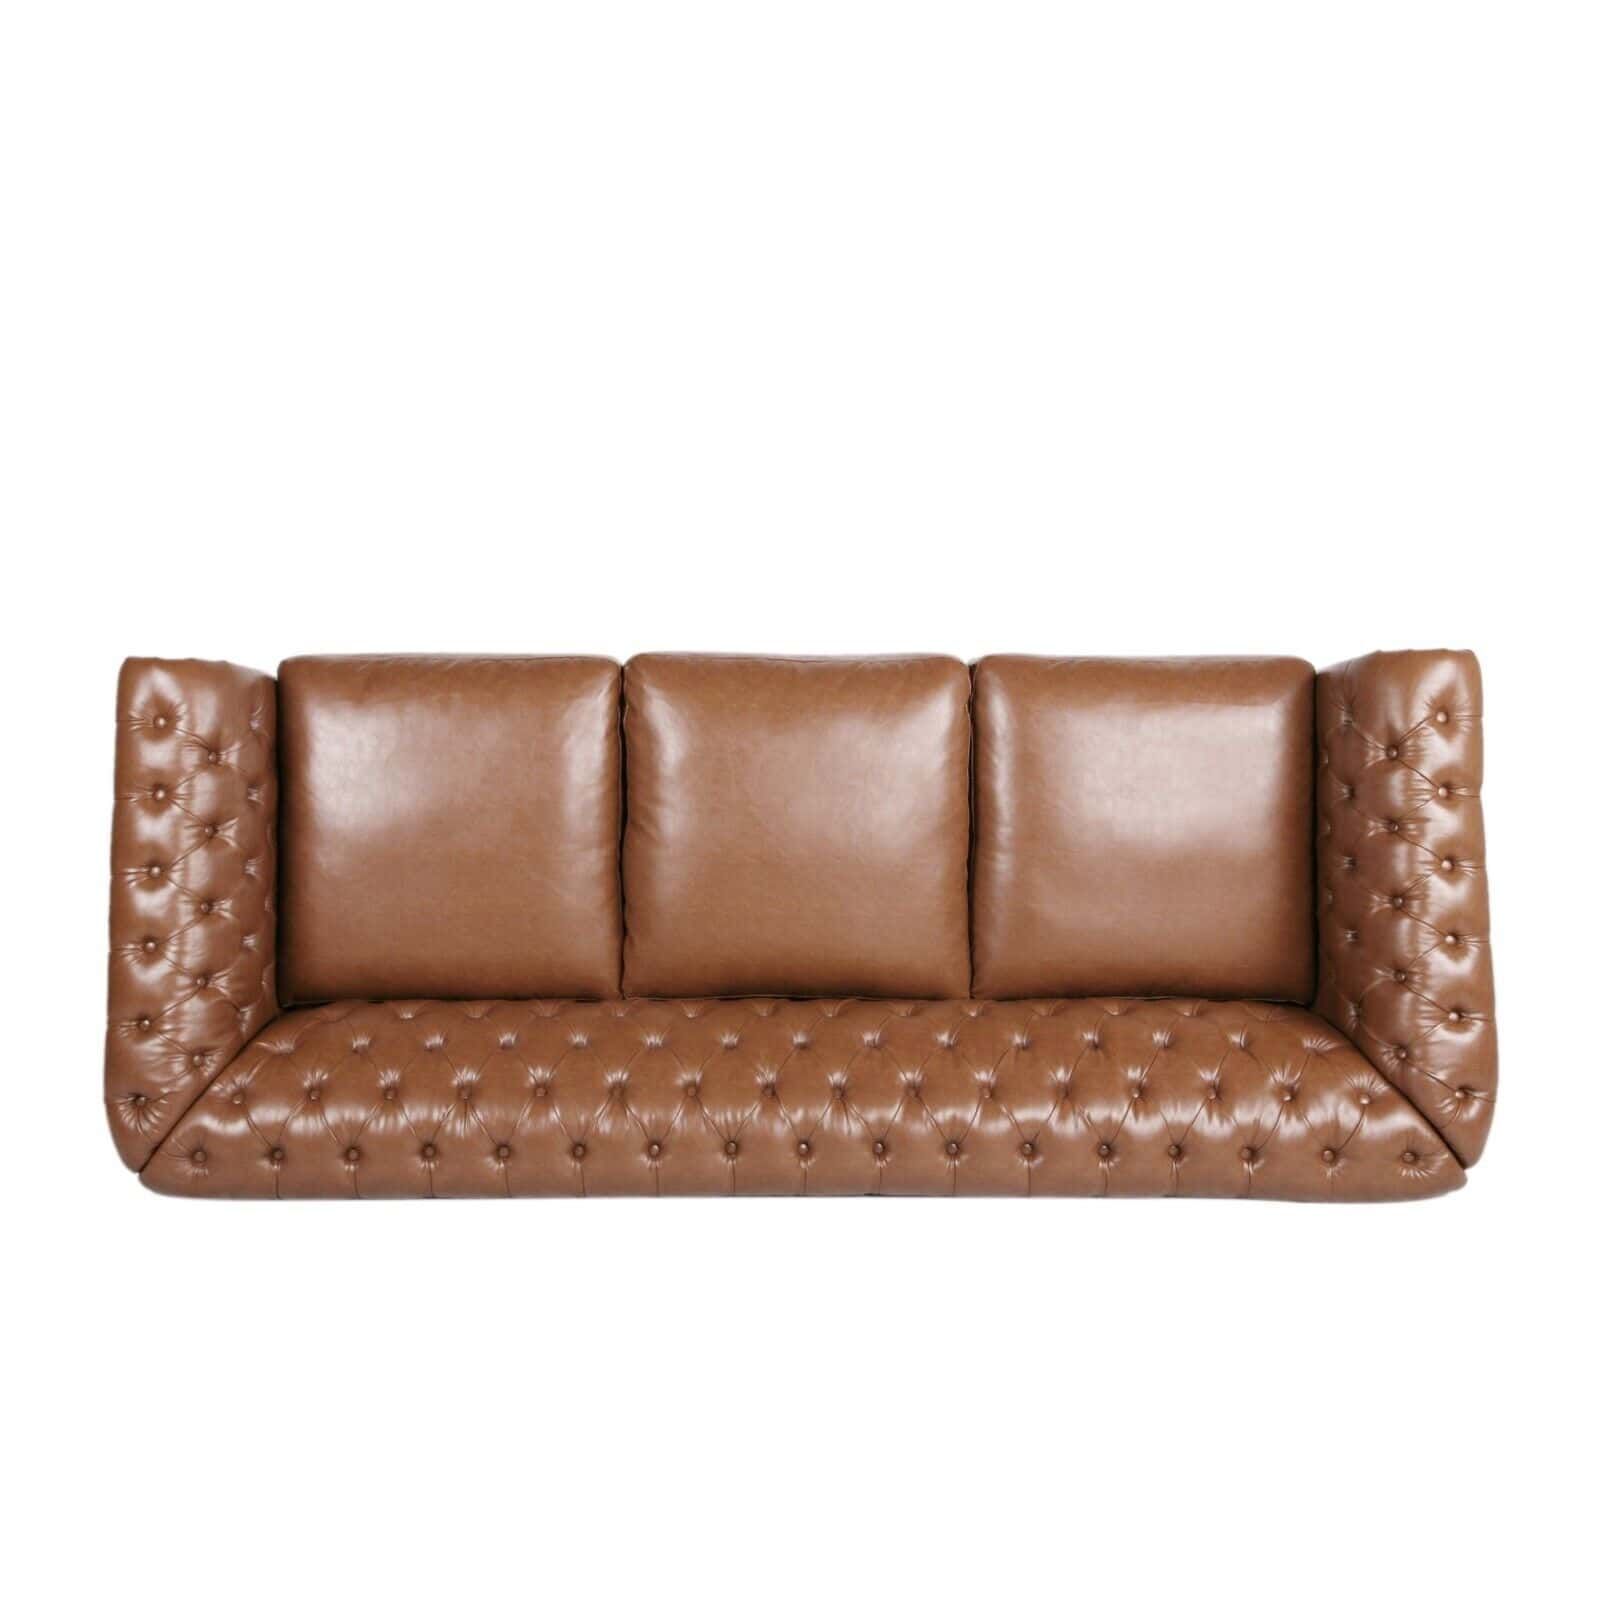 A tan leather sofa with buttons on the back.